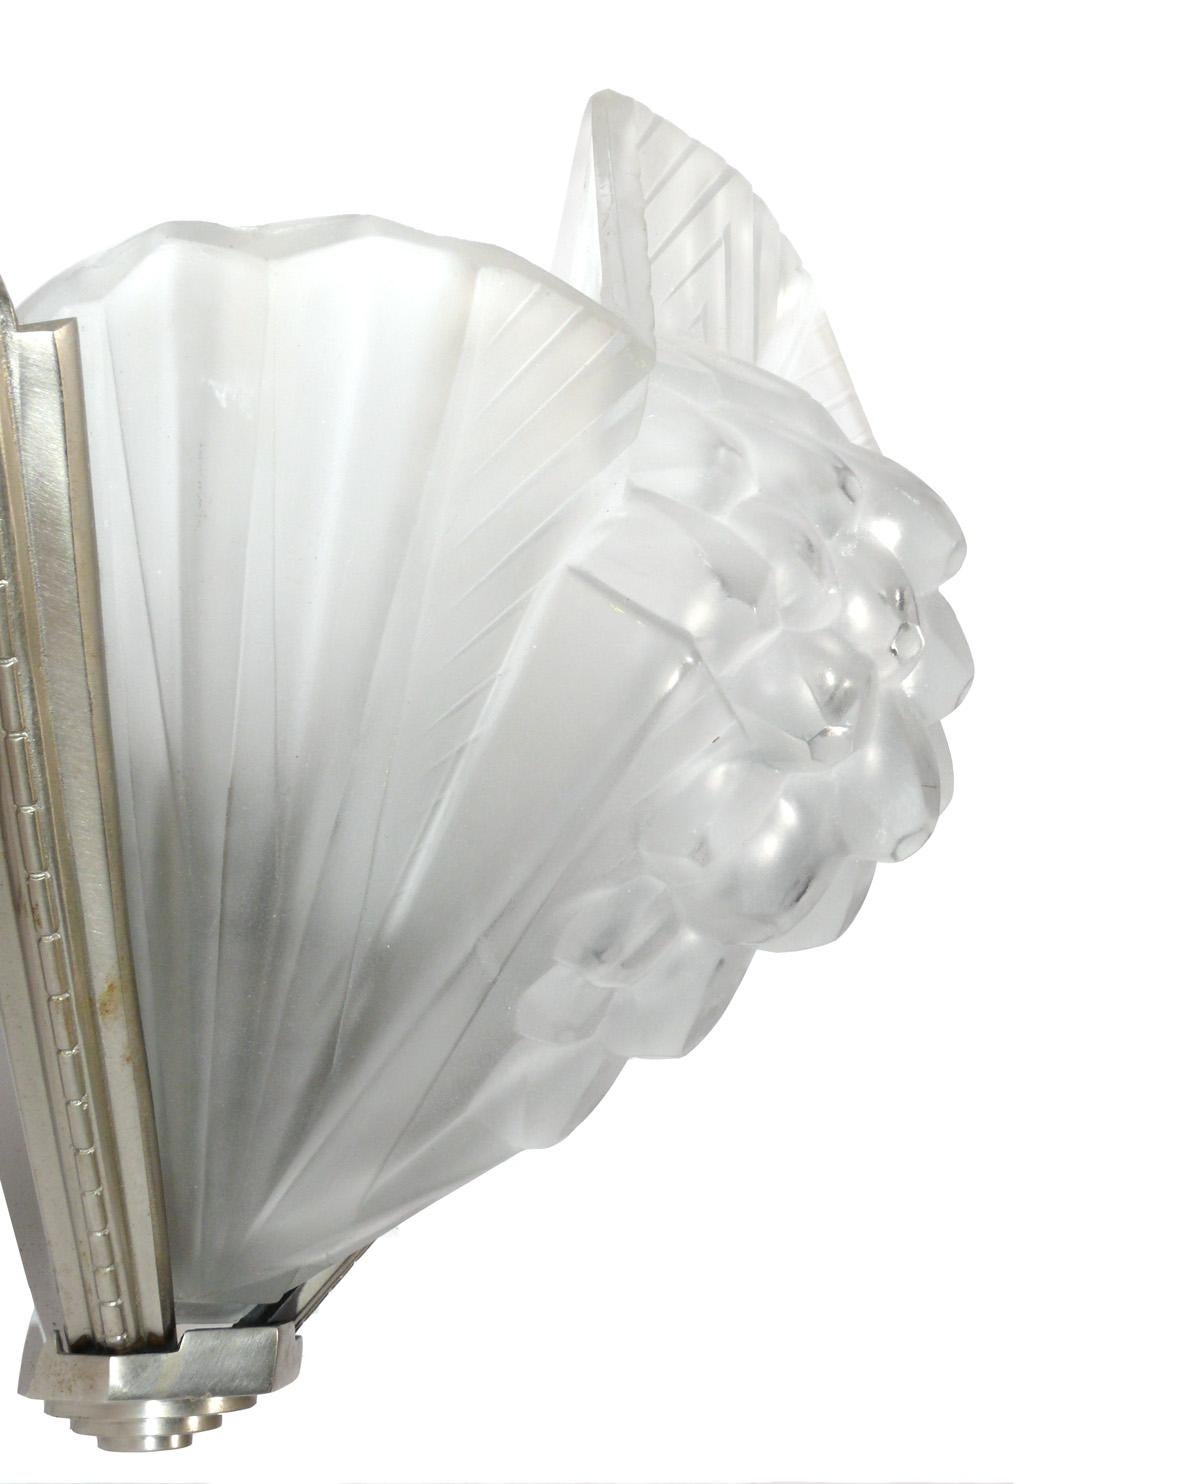 Mid-20th Century Pair of French Art Deco Glass Sconces by Atelier Petitot For Sale